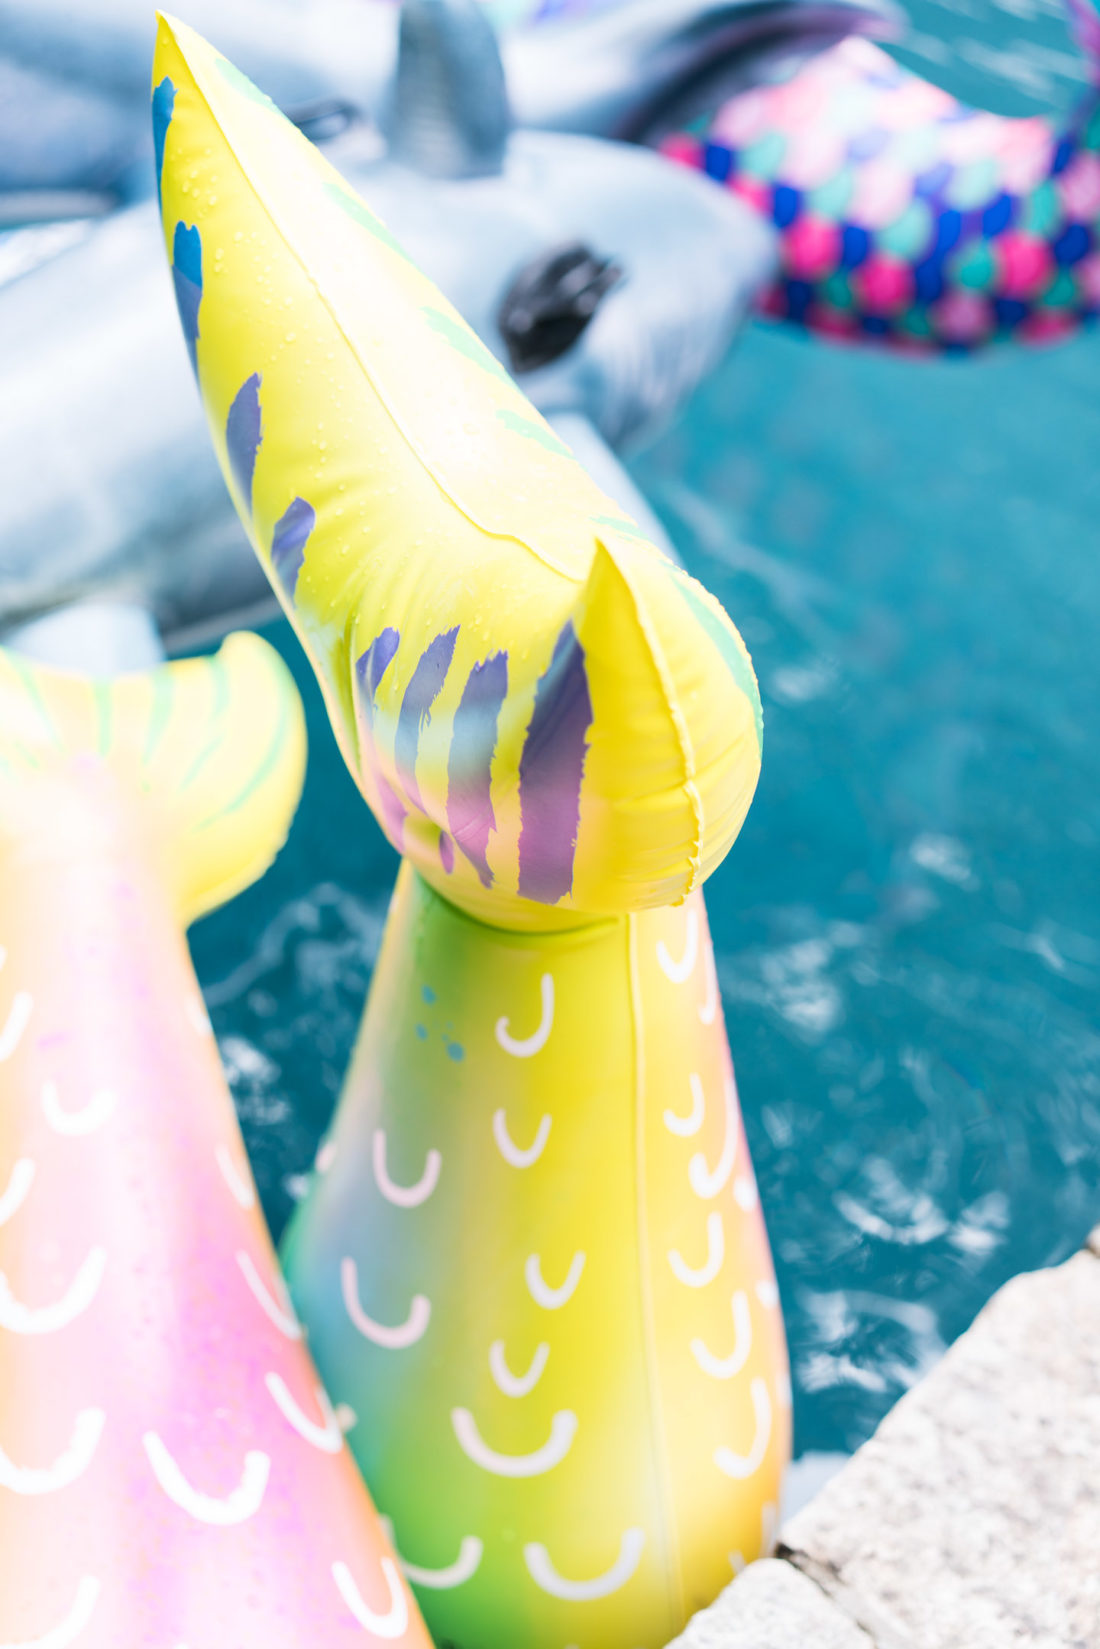 The pool floats at Marlowe Martino's third birthday party with a Mermaids vs. Sharks theme